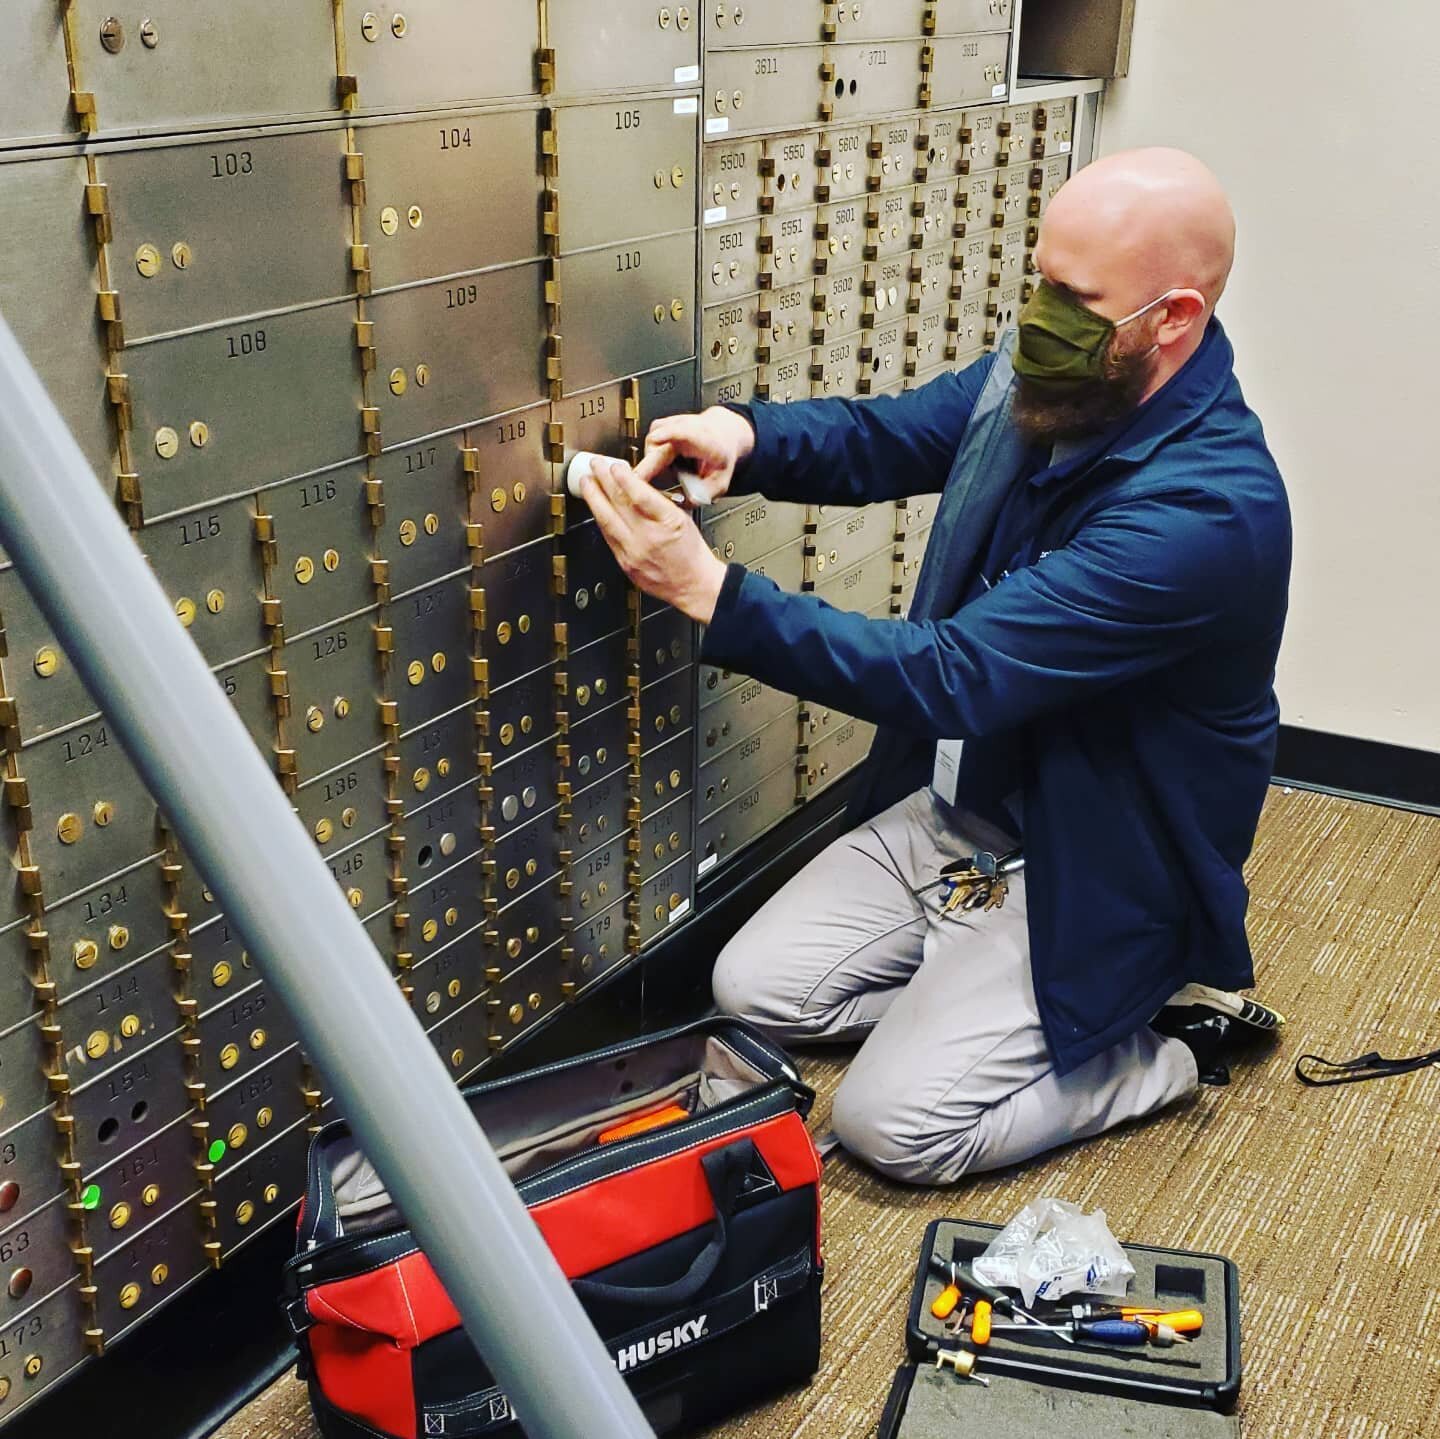 That time I had to have my client's safety deposit box drilled because he lost the key. 

#seattlesidekick #personalassistant